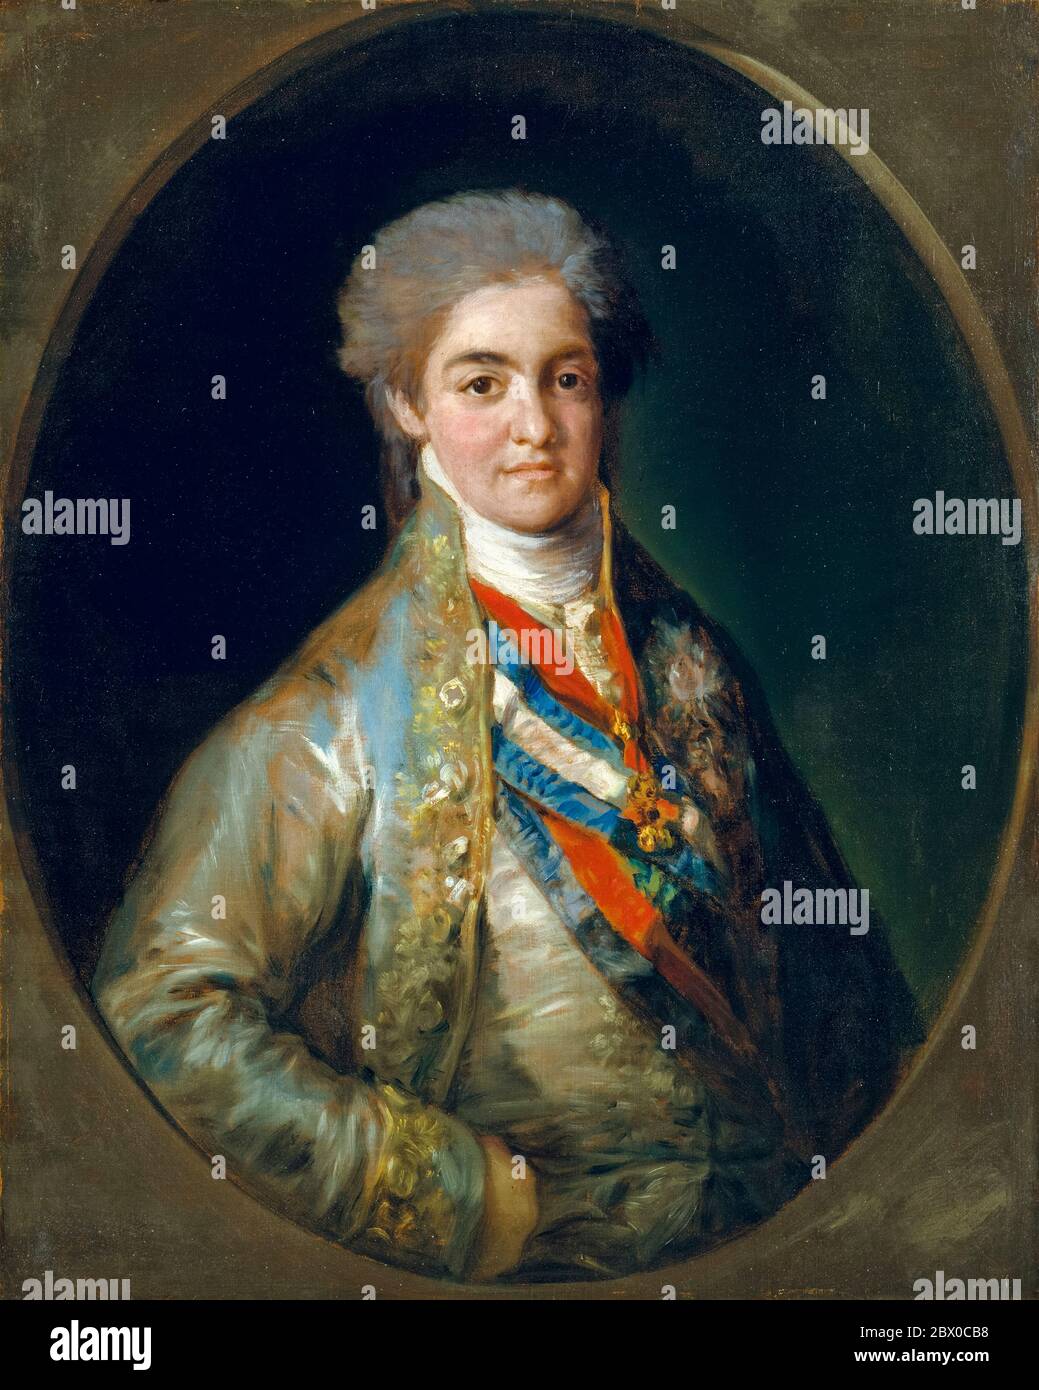 Ferdinand VII of Spain (1784–1833), when Prince of Asturias aged 16 years old, portrait painting by Francisco Goya, circa 1800 Stock Photo